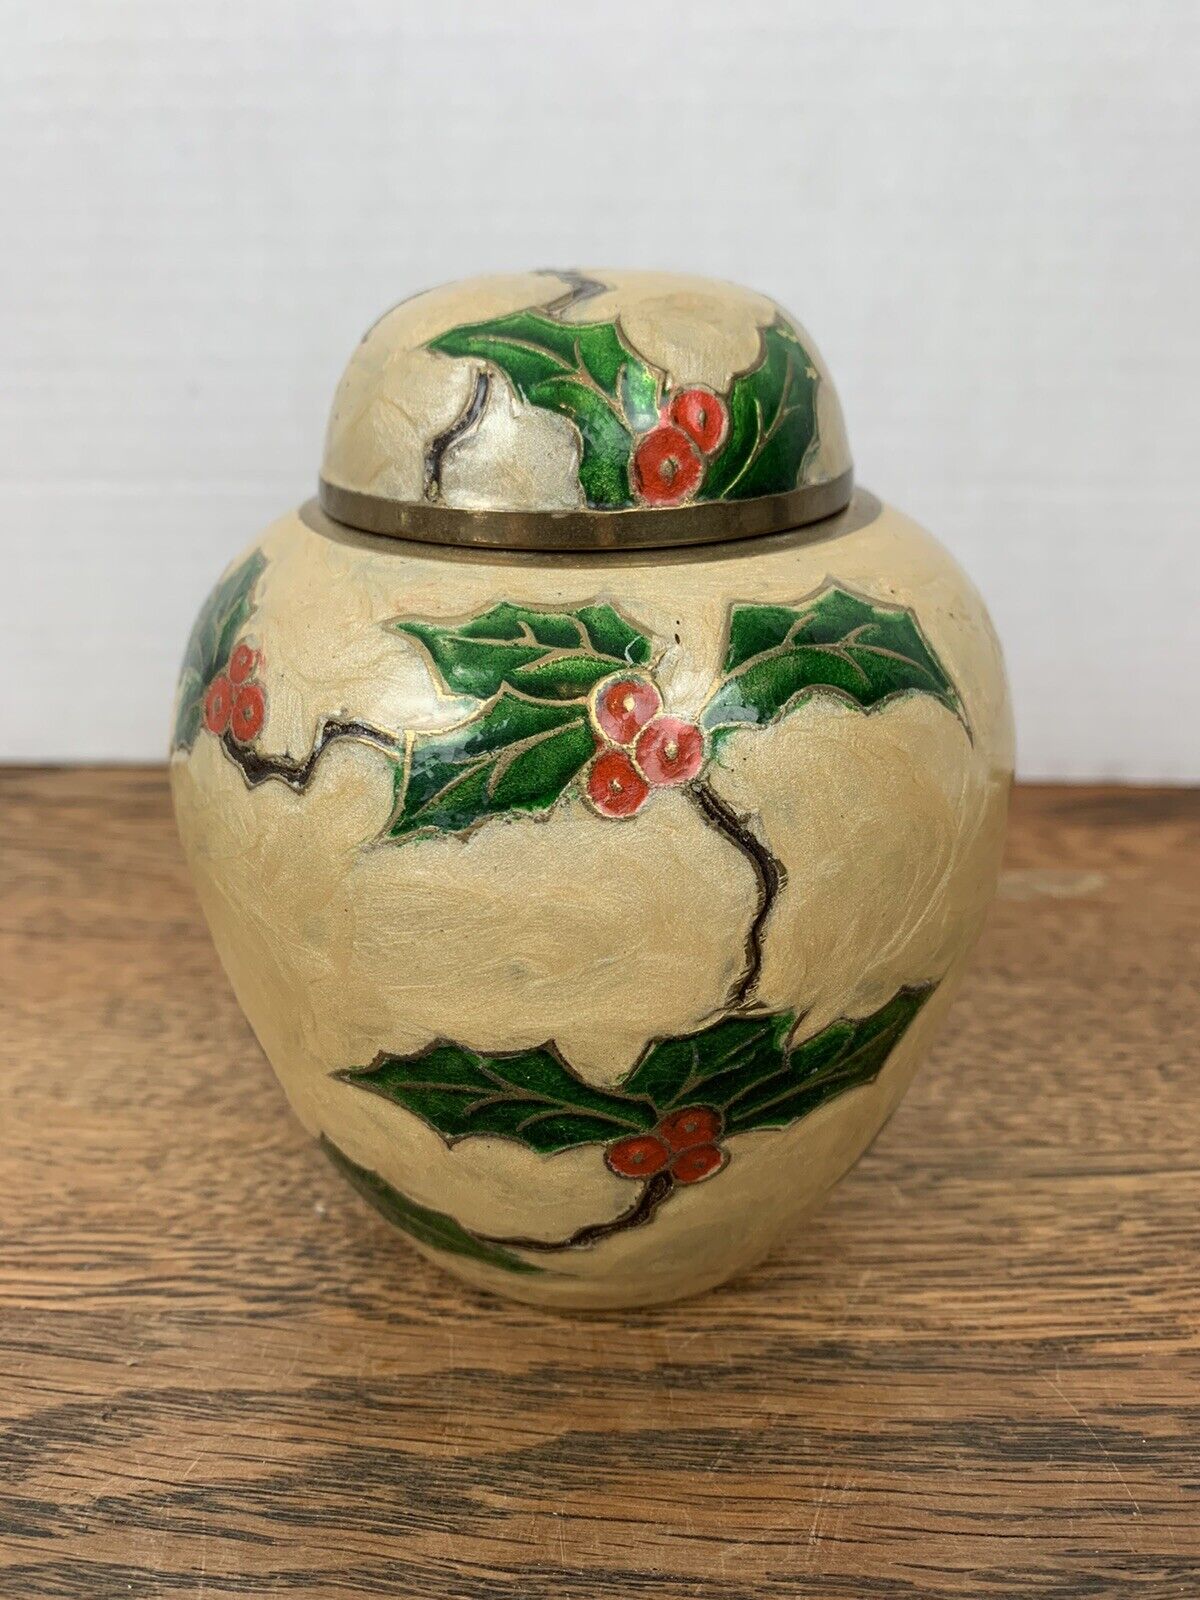 Christmas Holly Cloisonne Lidded Ginger Jar 5 Inches tall